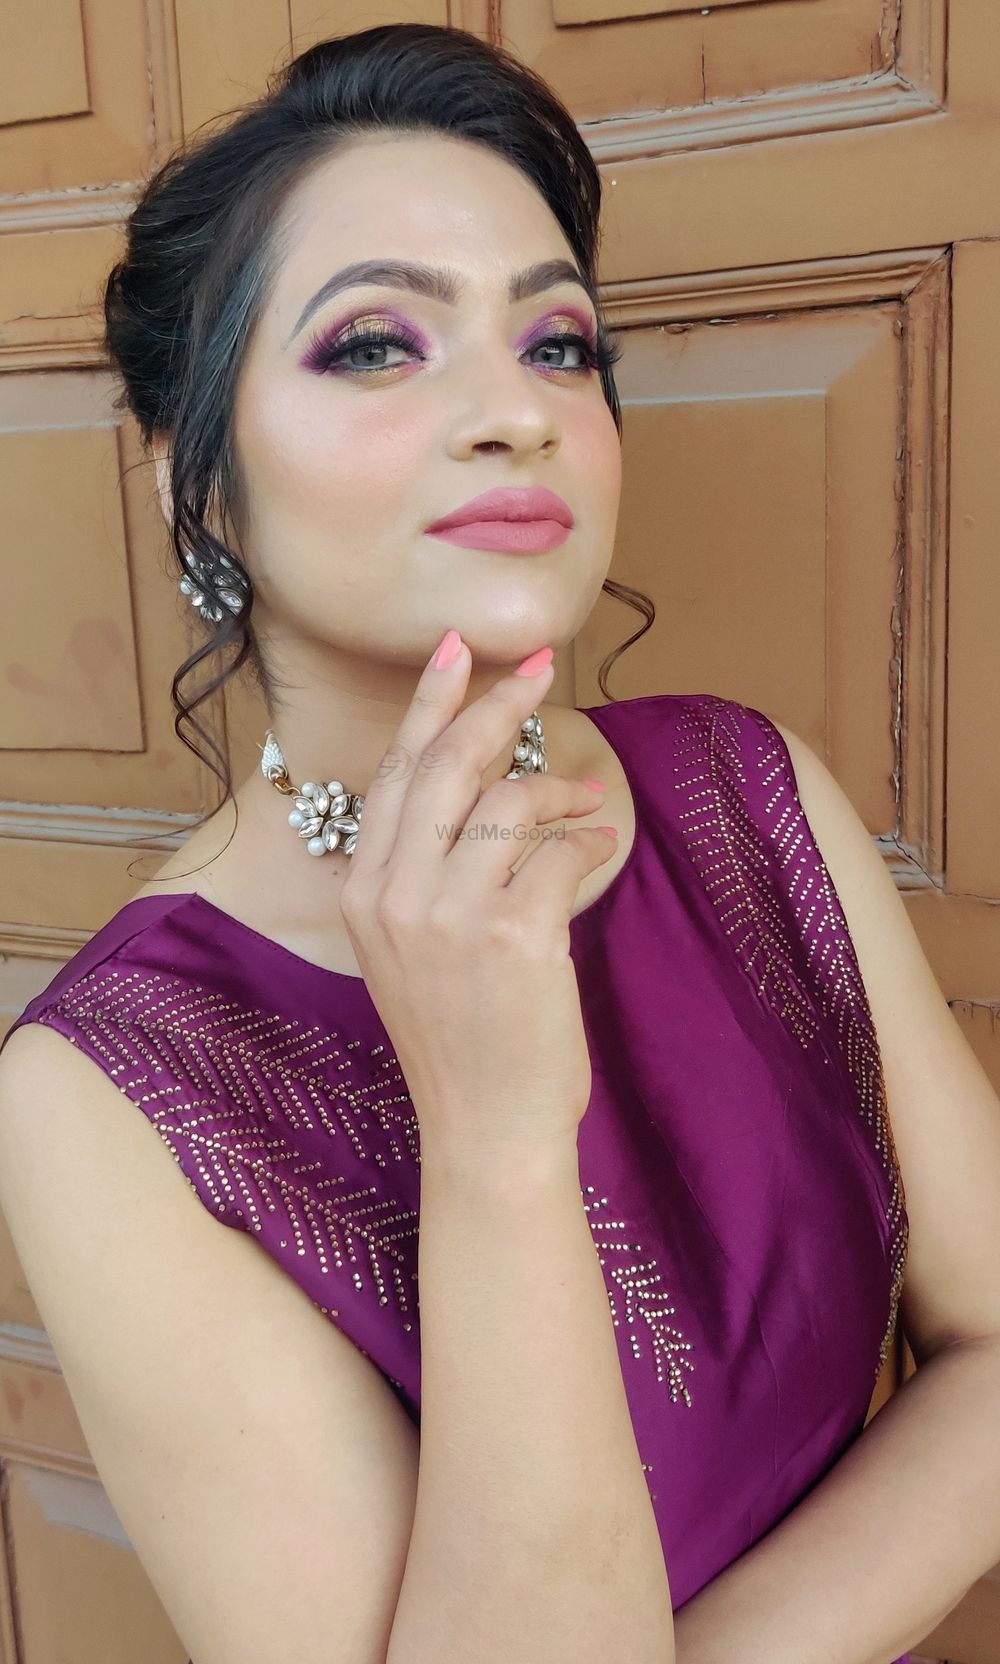 Photo By The Adorable by Pooja - Bridal Makeup